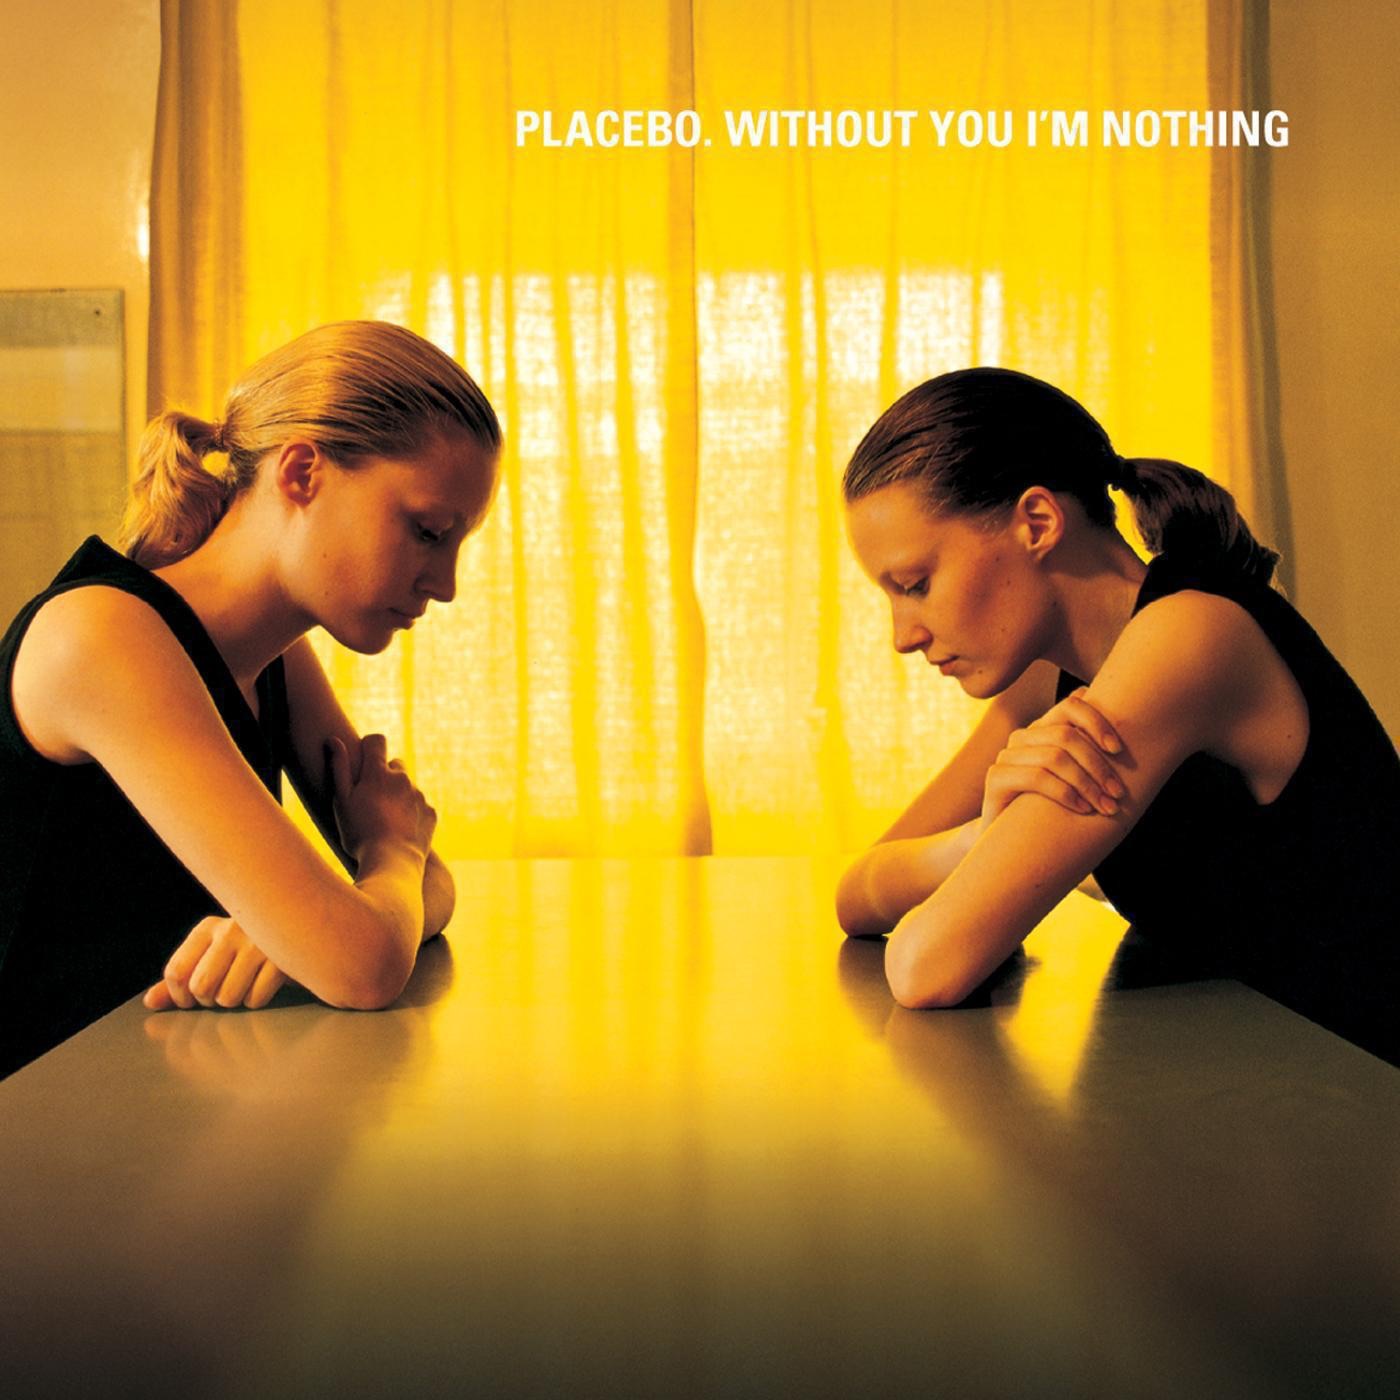 Without You I'm Nothing by Placebo, David Bowie, Without You I'm Nothing